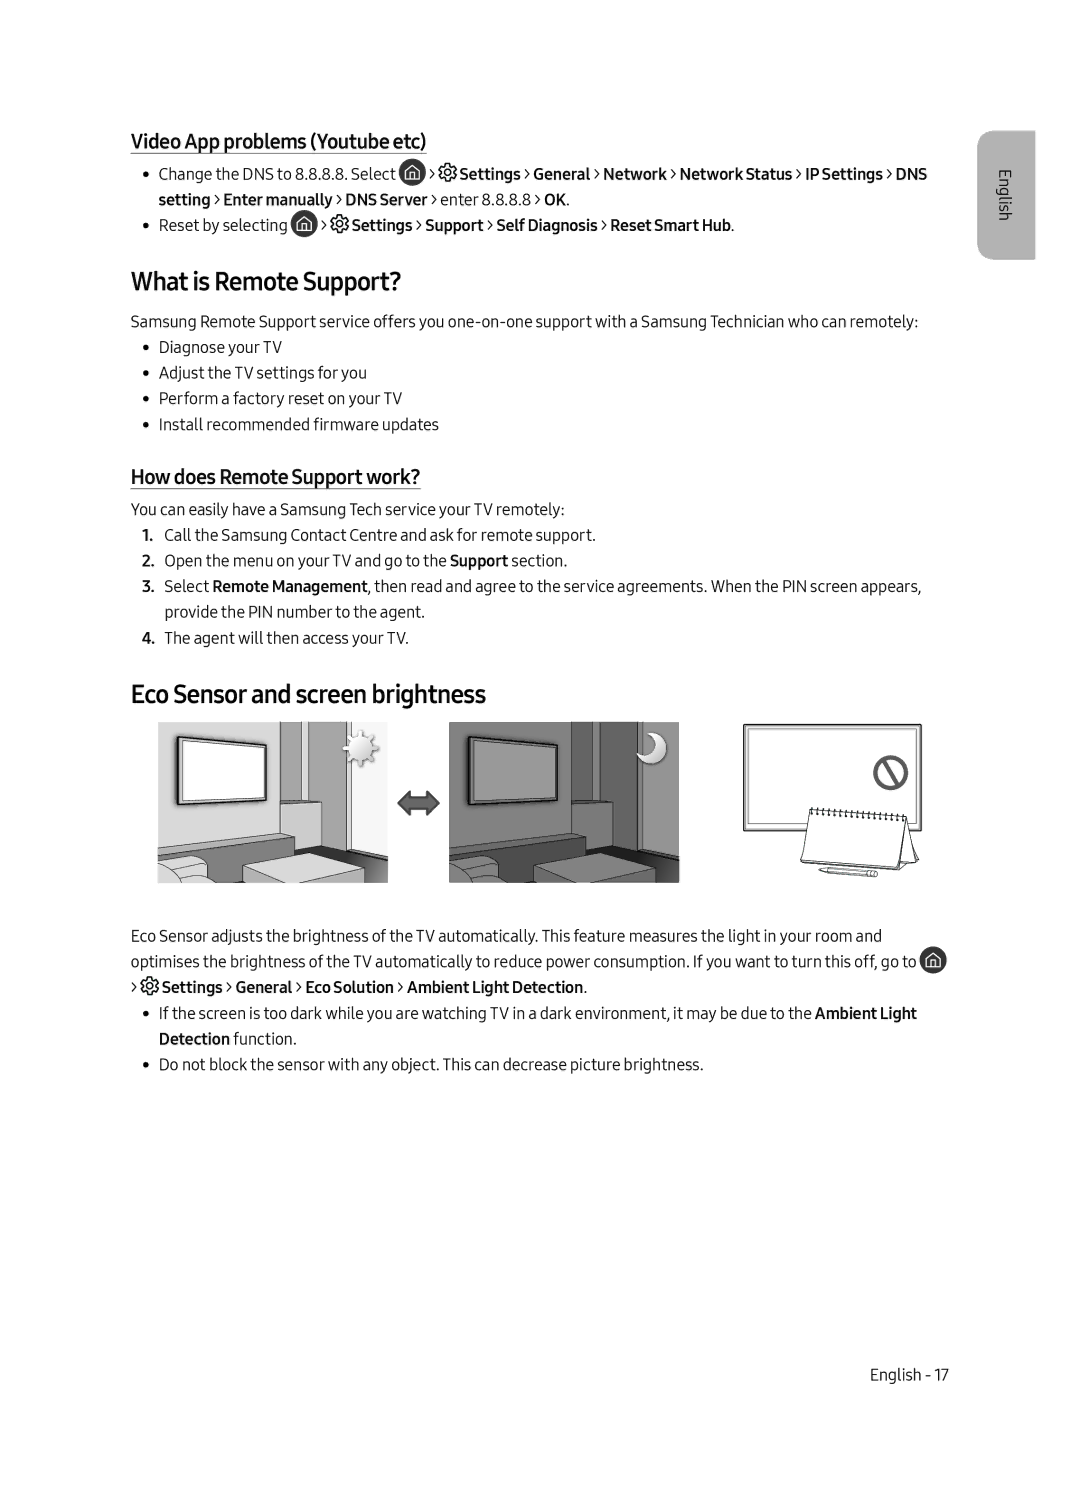 Samsung UE55MU8005TXXC manual What is Remote Support?, Eco Sensor and screen brightness, Video App problems Youtube etc 